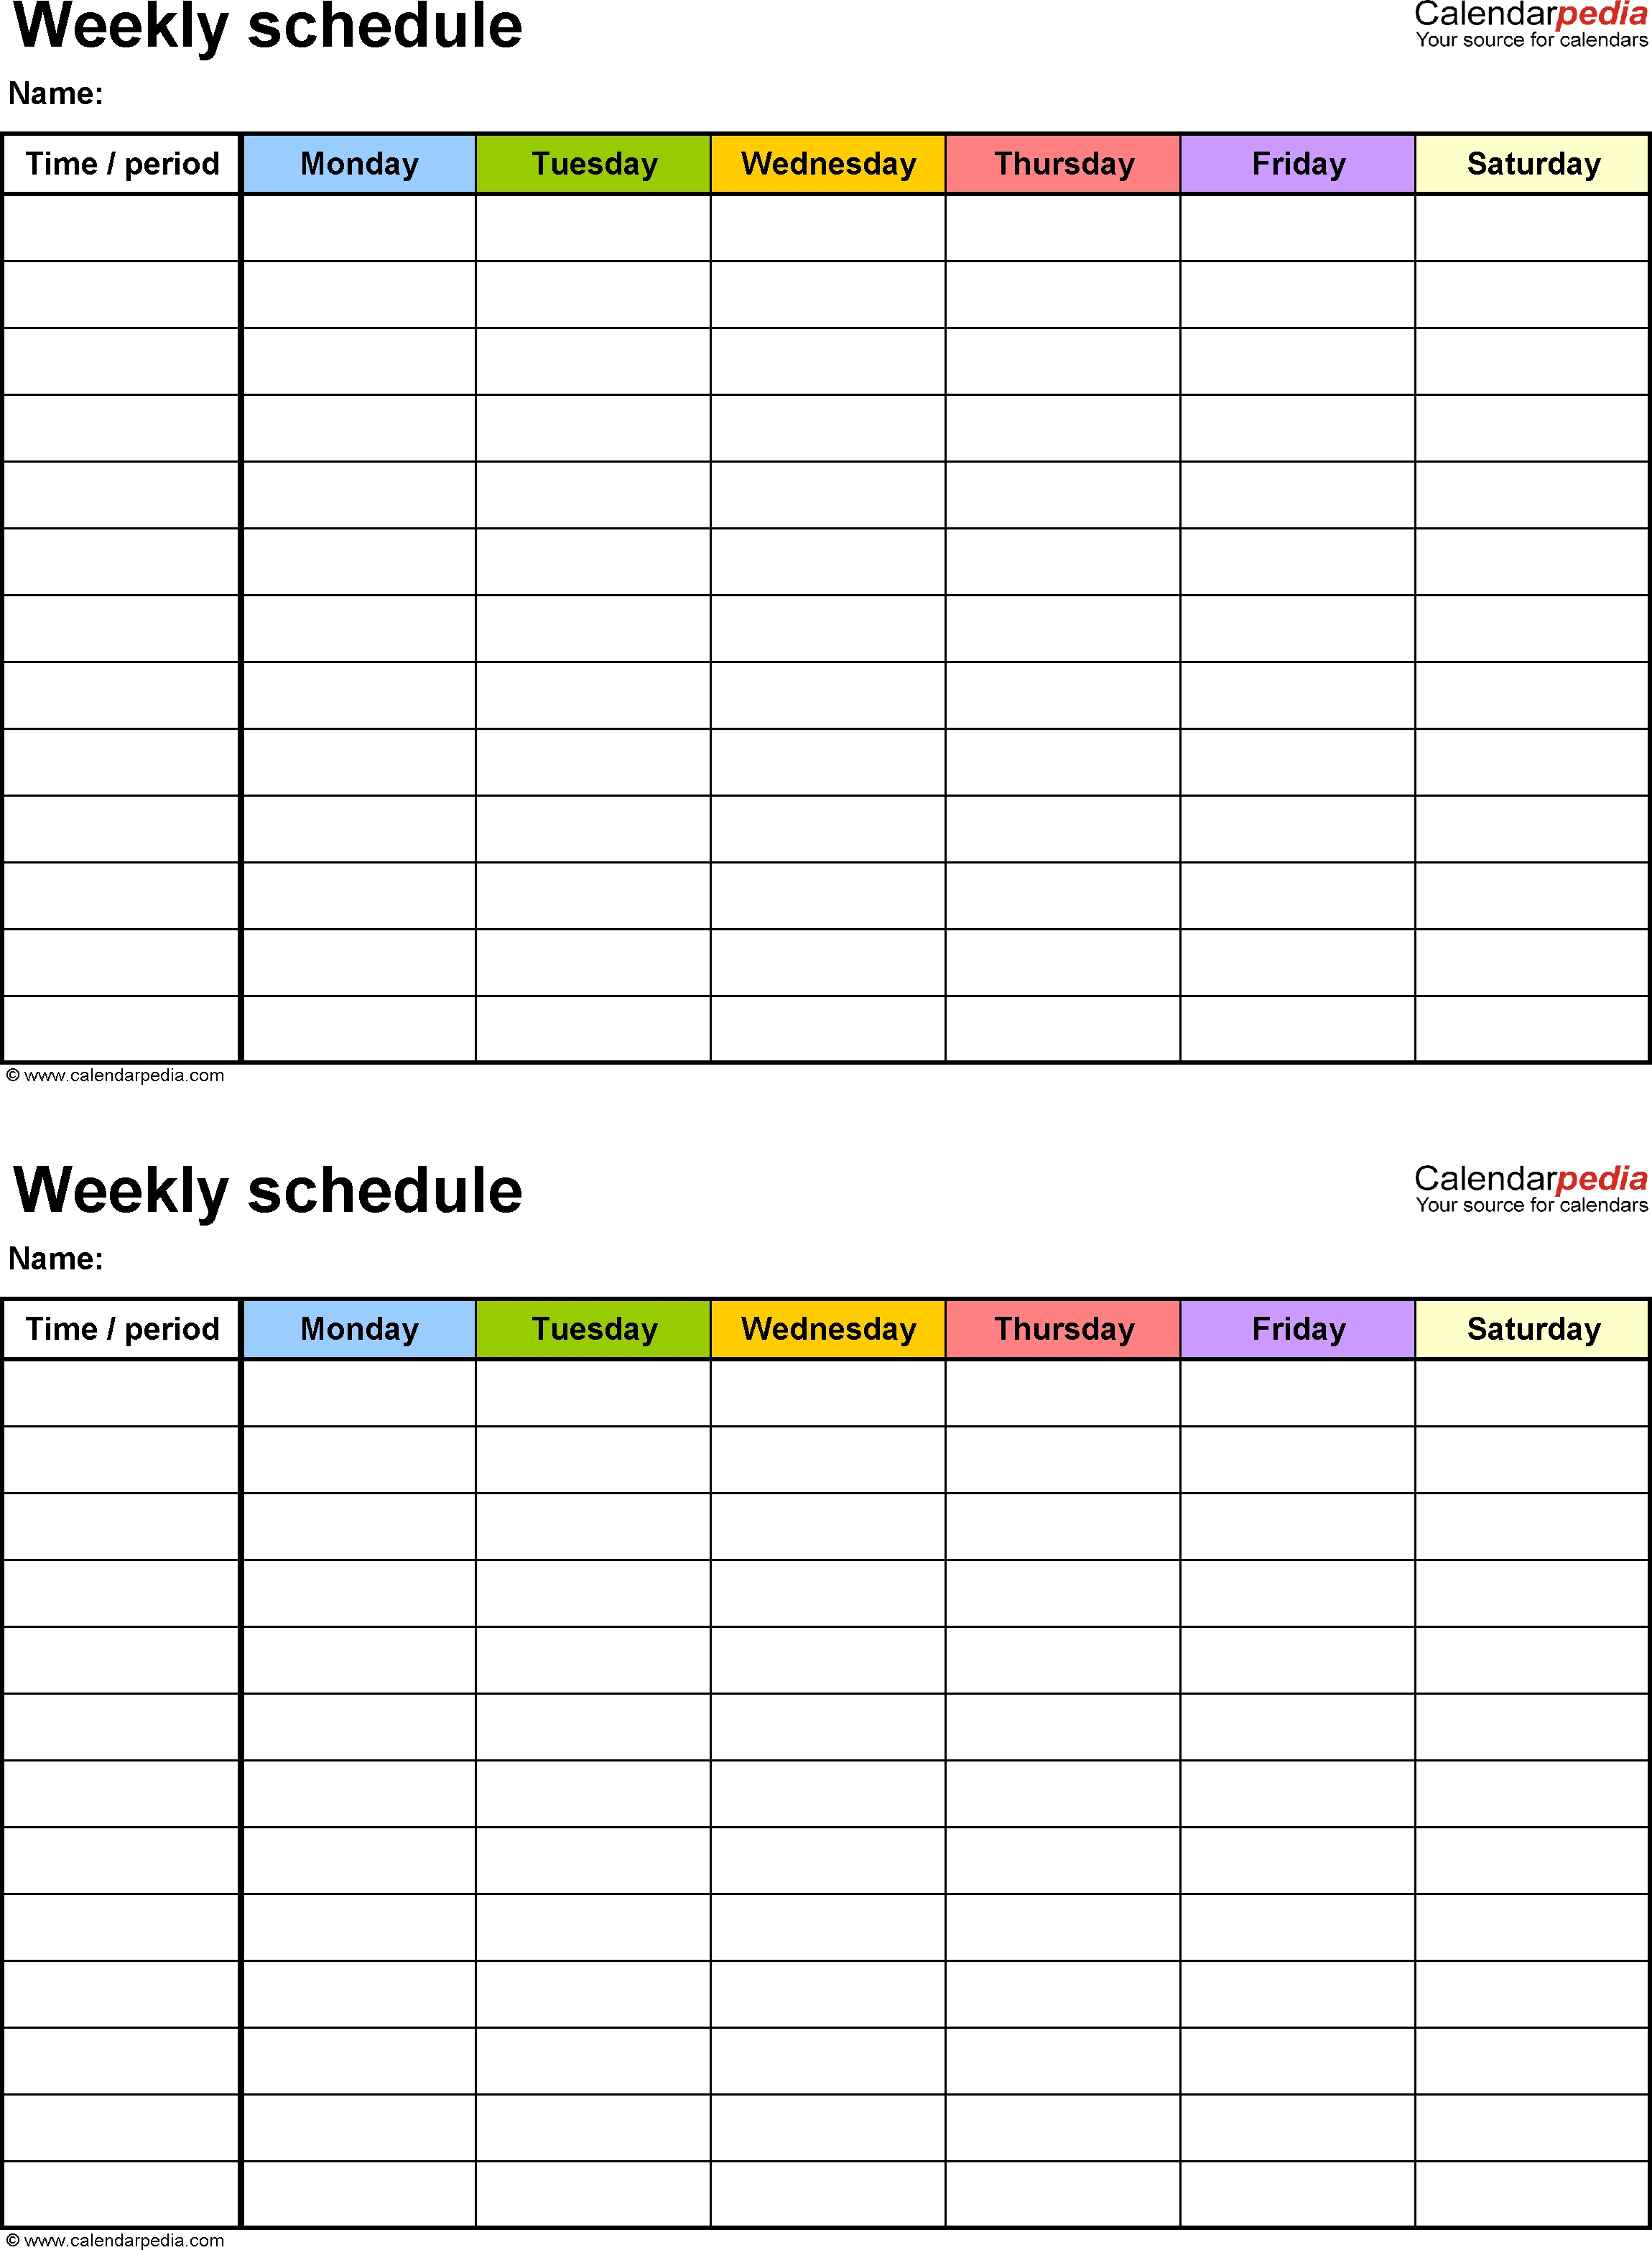 Free Weekly Schedule Templates For Excel - 18 Templates with regard to Kid Days Of The Week Calendar Template